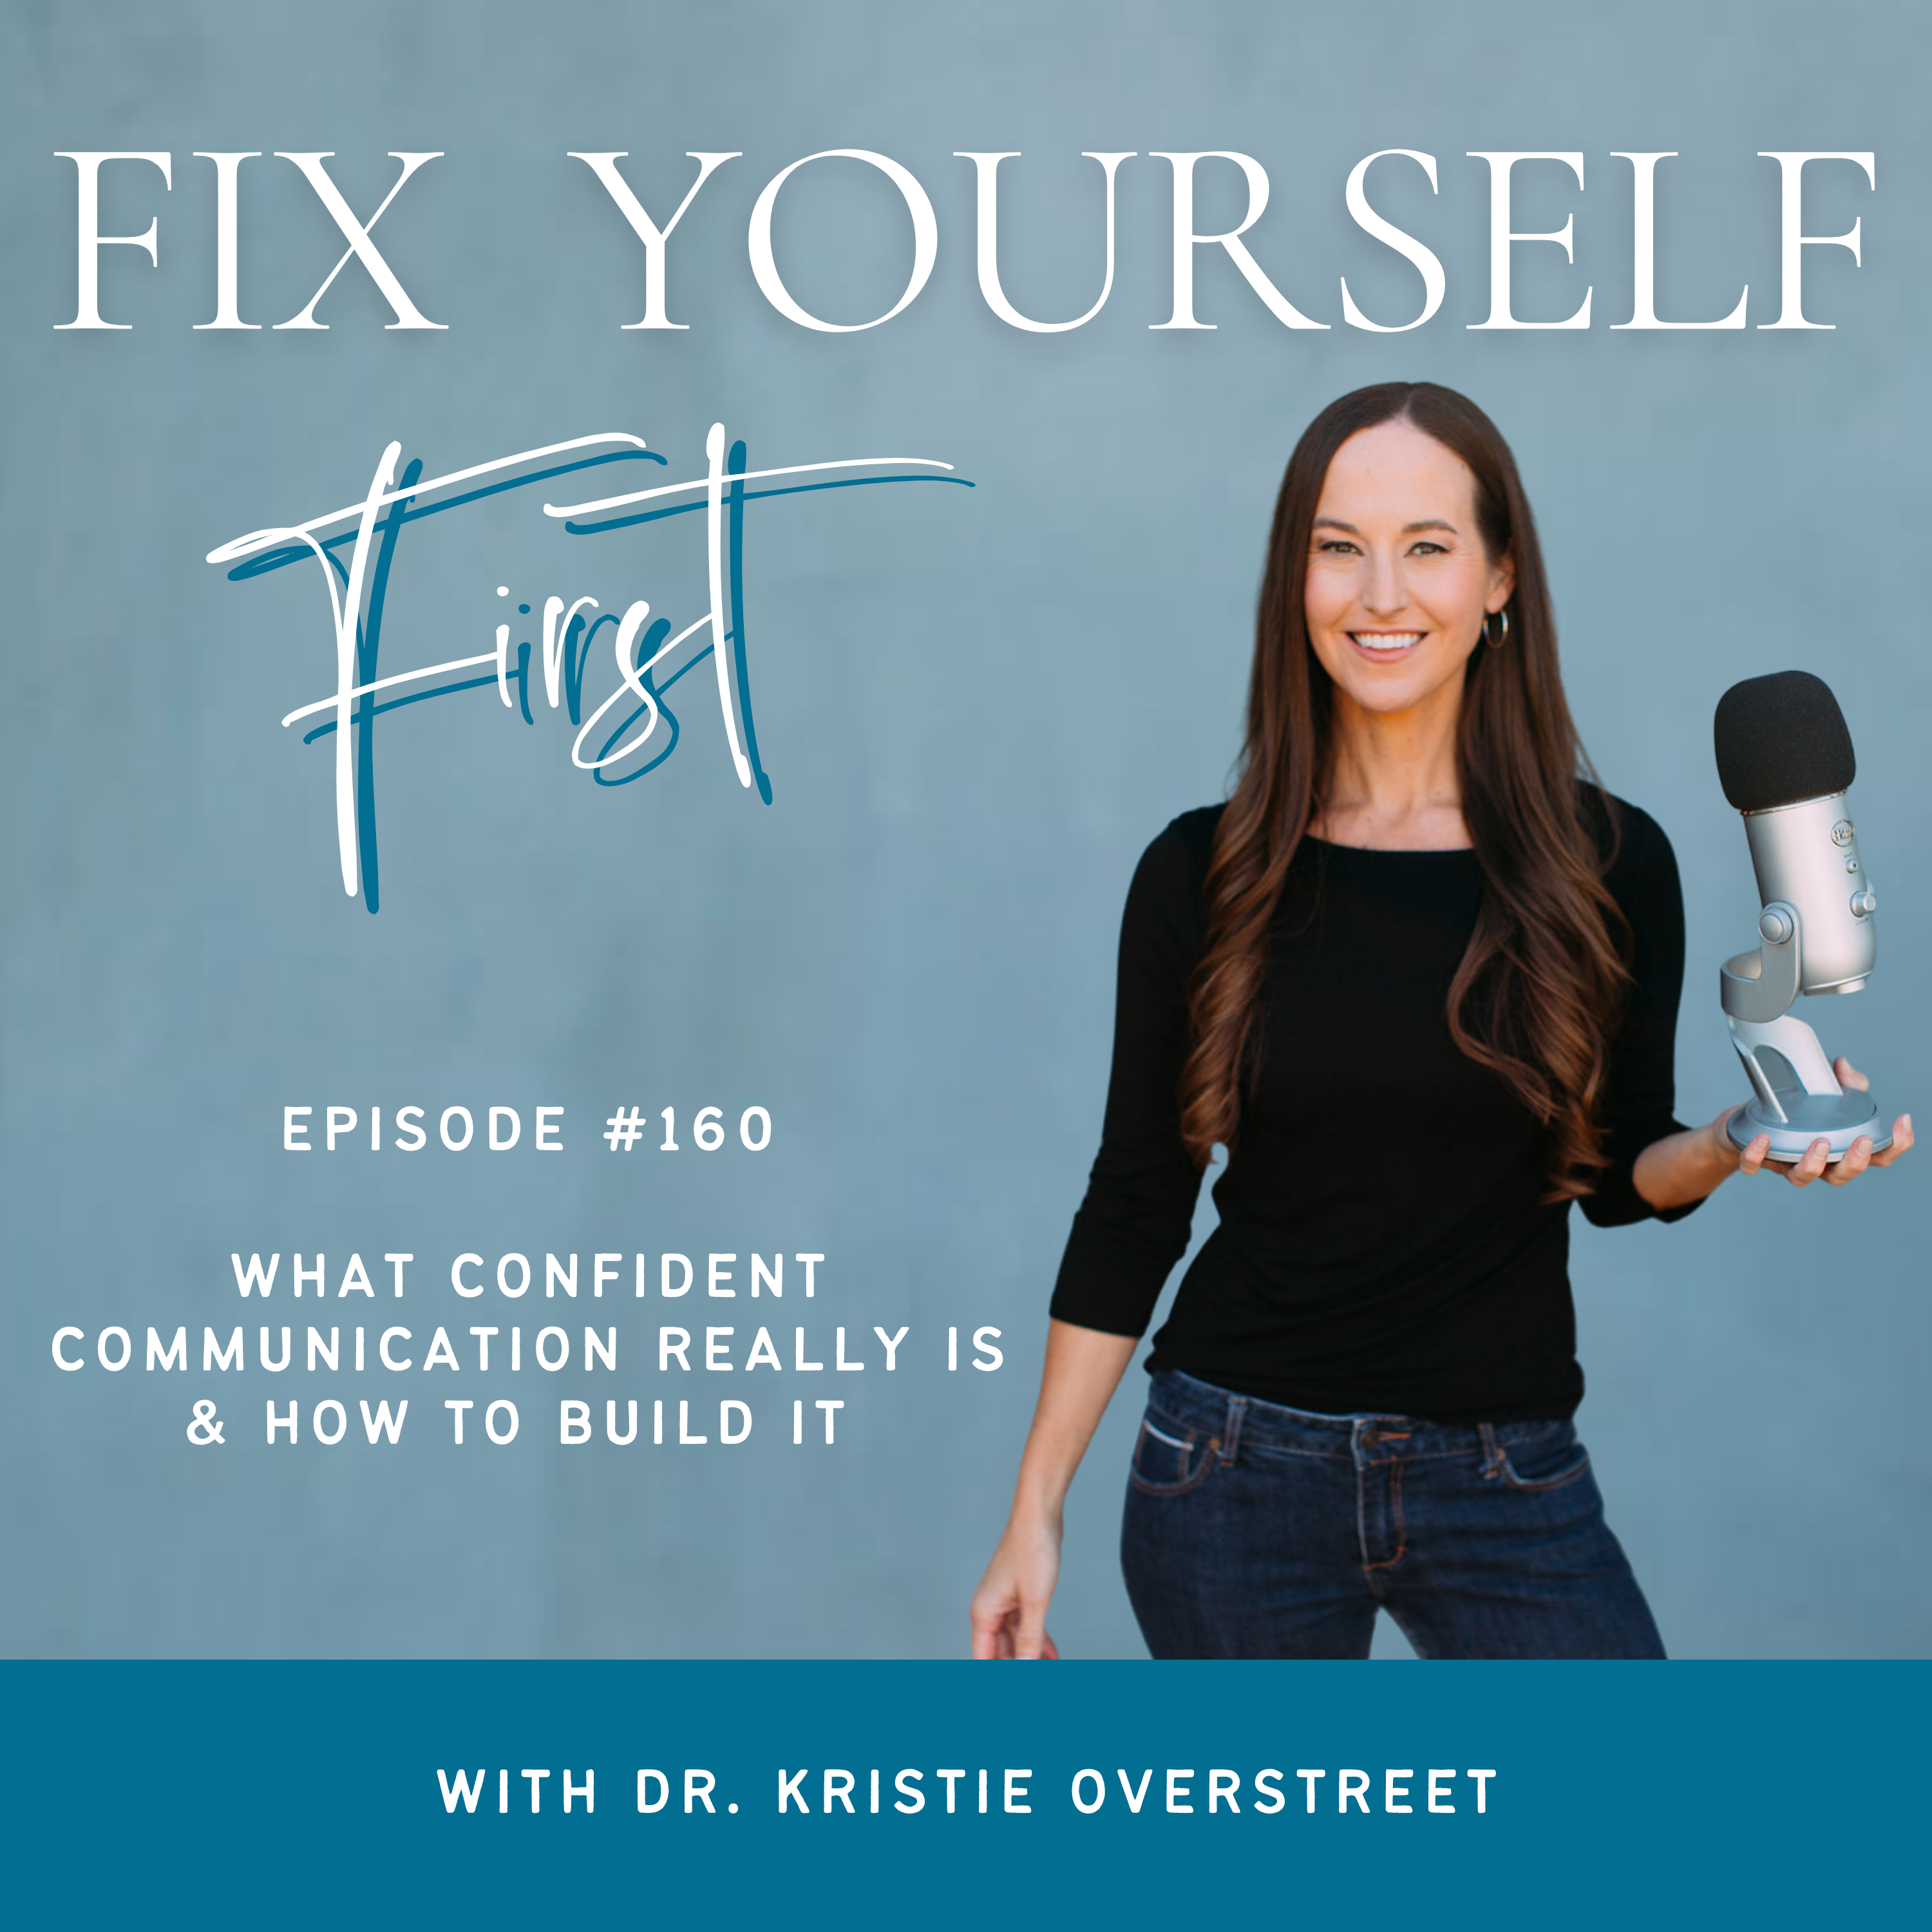 Fix Yourself First Episode 160 What Confident Communication Really Is & How to Build It